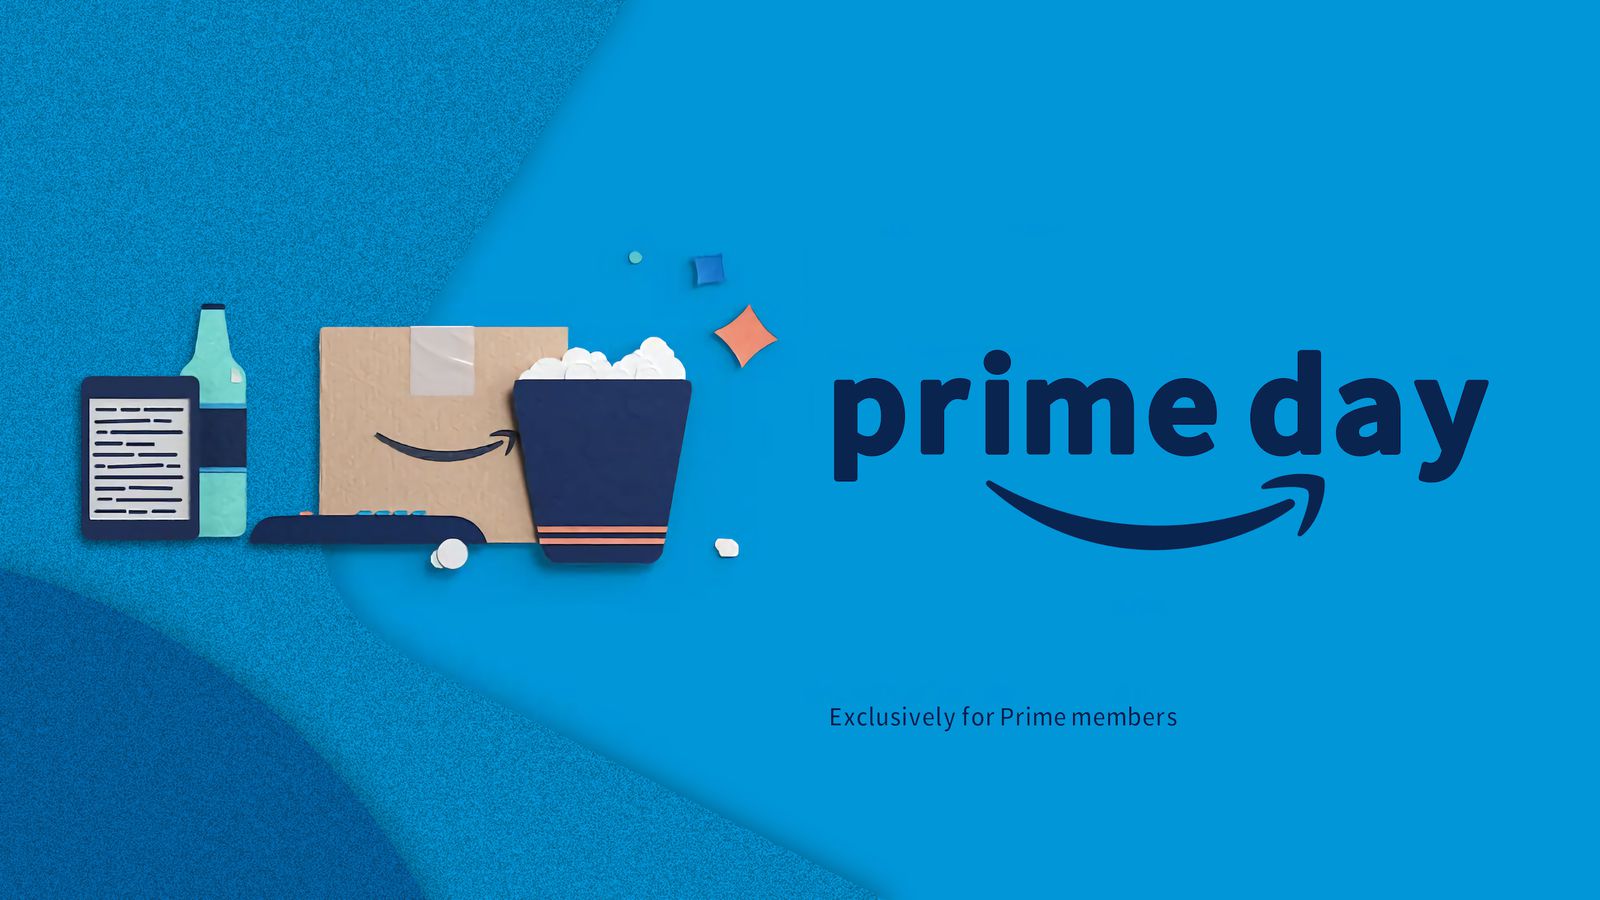 https://images.macrumors.com/t/PcpFZS5hHThebDy337_J7F_ocLo=/1600x0/article-new/2020/10/primeday2020_feature3.jpg